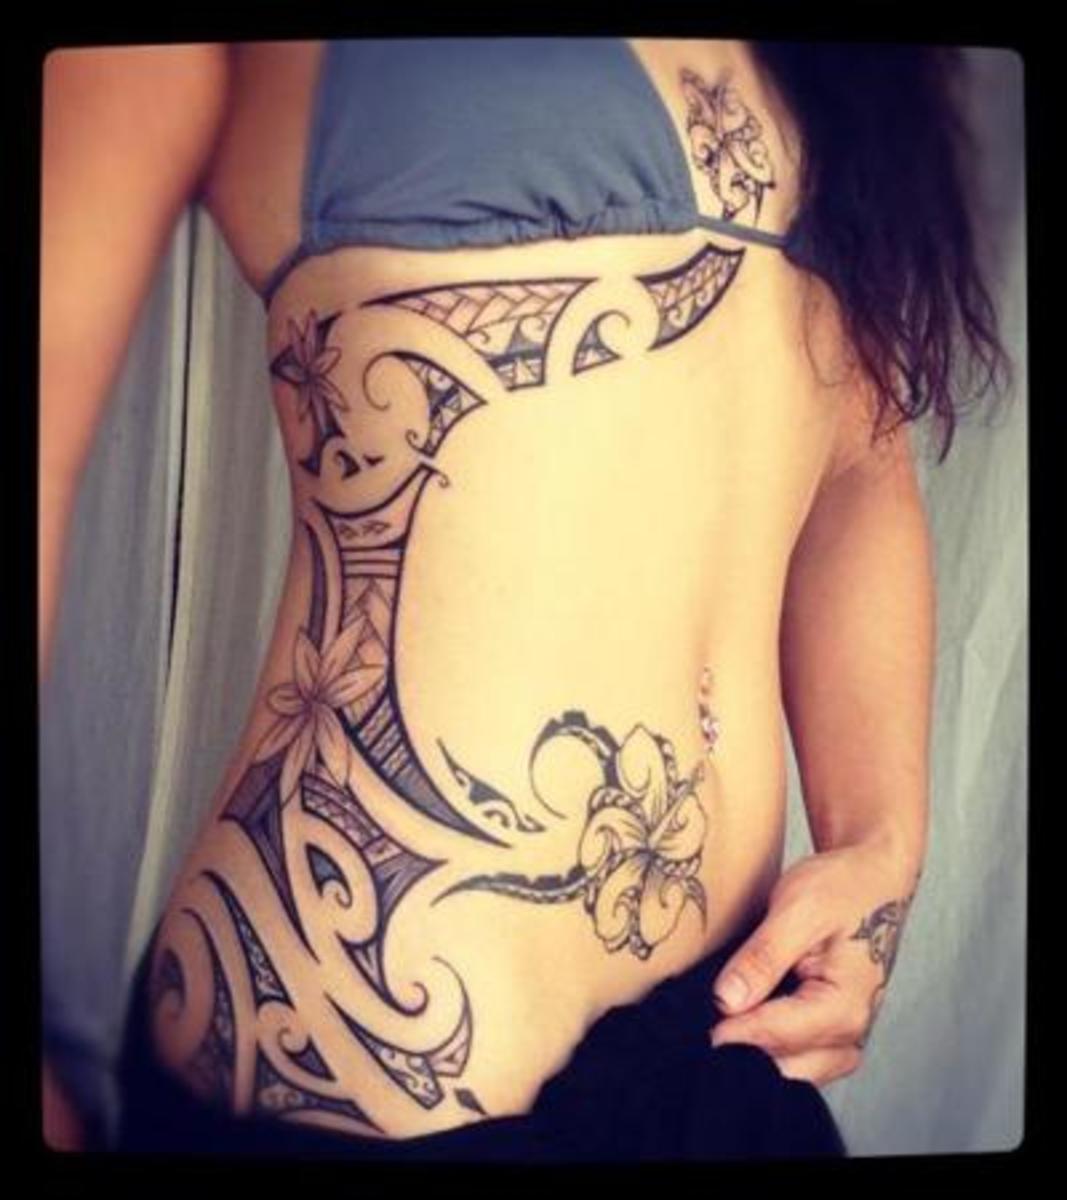 Everything You Need To Know Before Getting A Rib Tattoo Tatring Tattoos Piercings